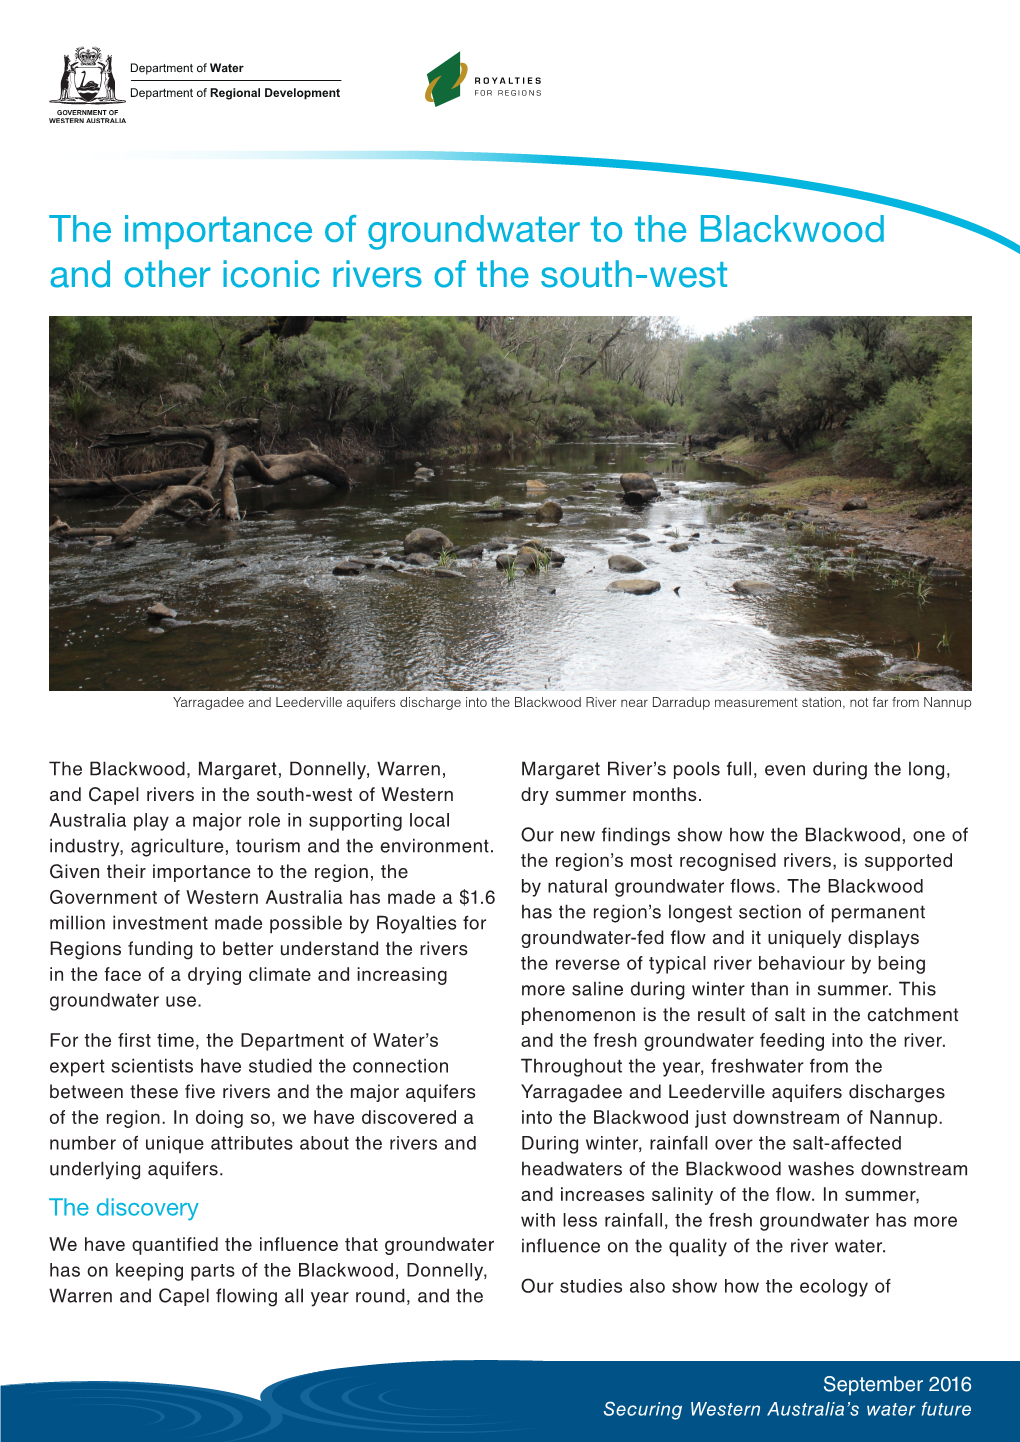 The Importance of Groundwater to the Blackwood and Other Iconic Rivers of the South-West